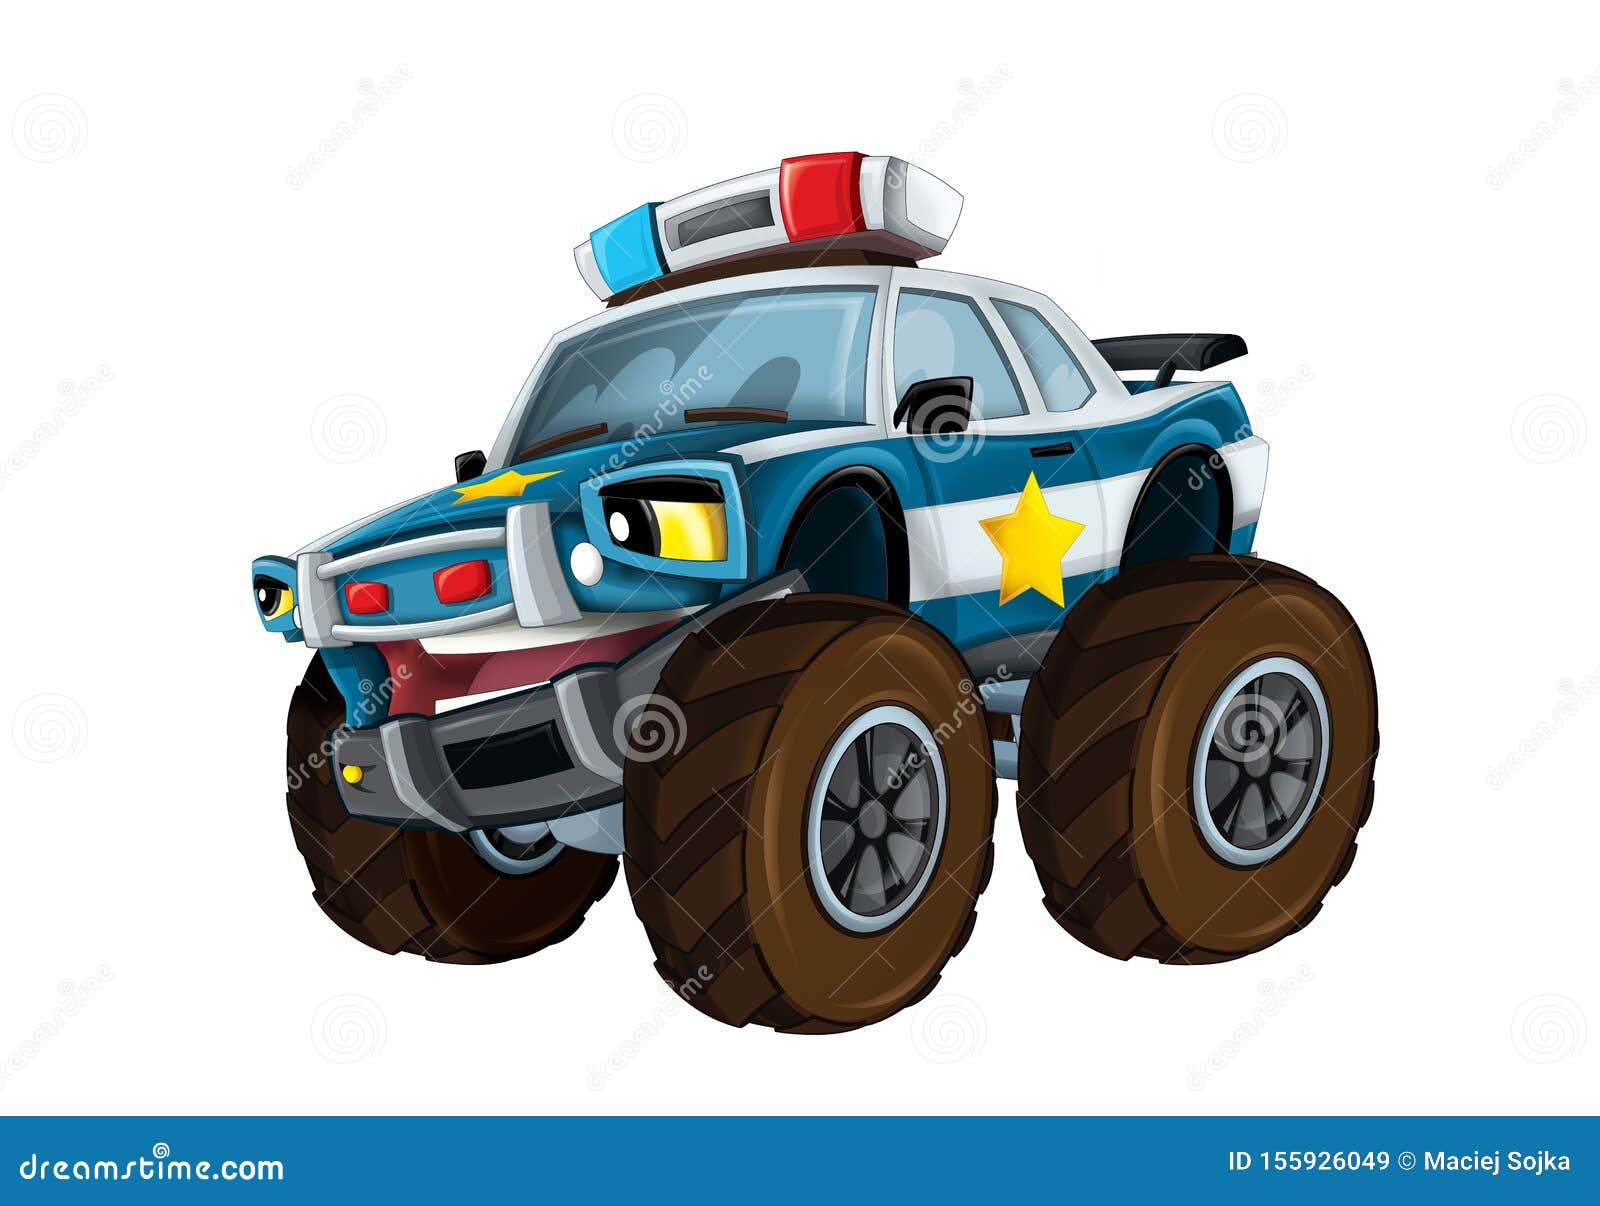 Cartoon Happy and Funny Off Road Police Car Looking Like Monster Truck -  Smiling Vehicle Stock Illustration - Illustration of clip, motorized:  155926049